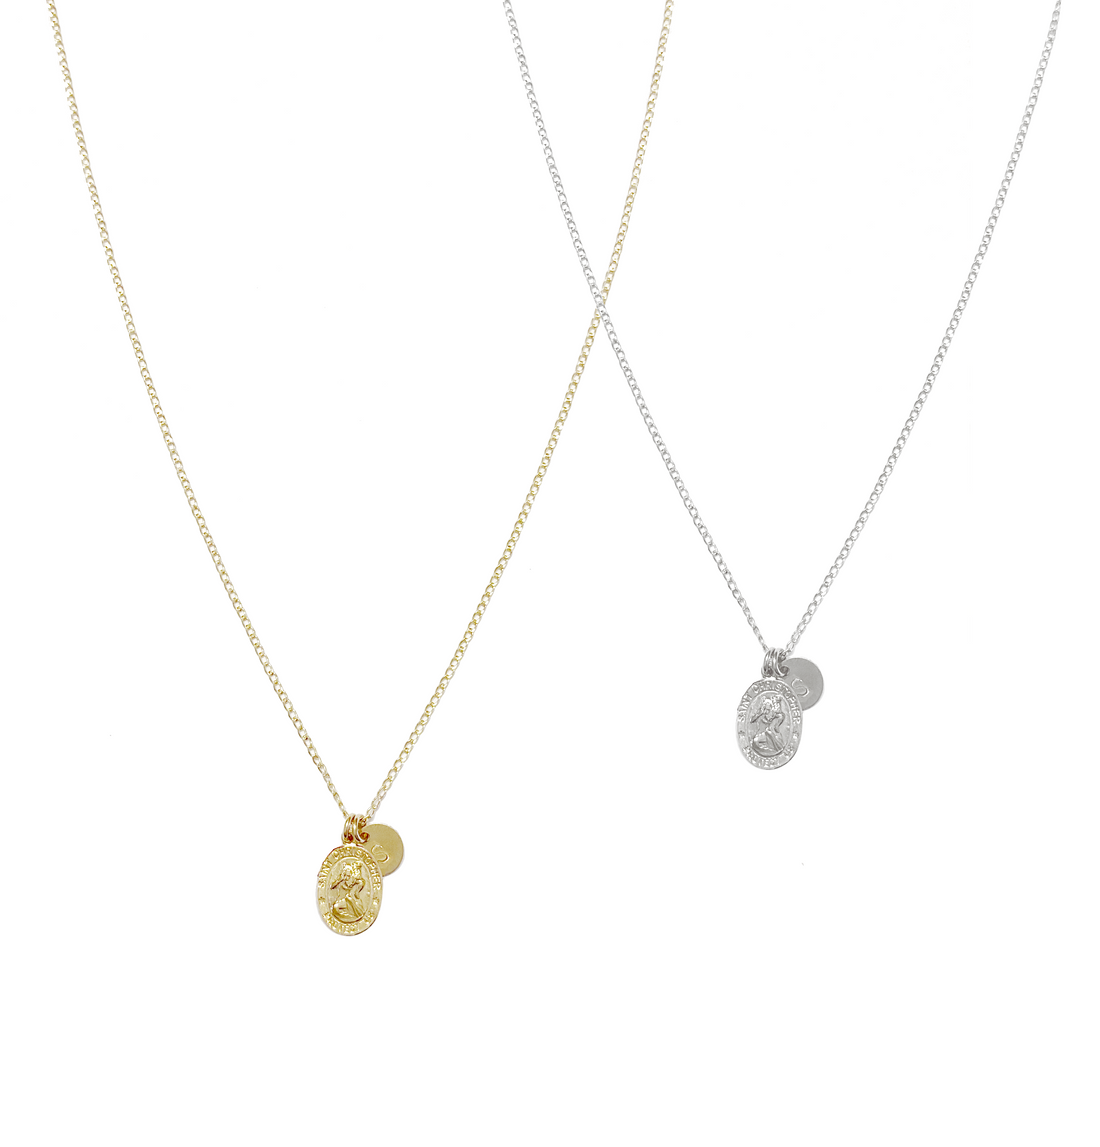 Emma - St Christopher & Disc Necklace - Gold, Silver >>